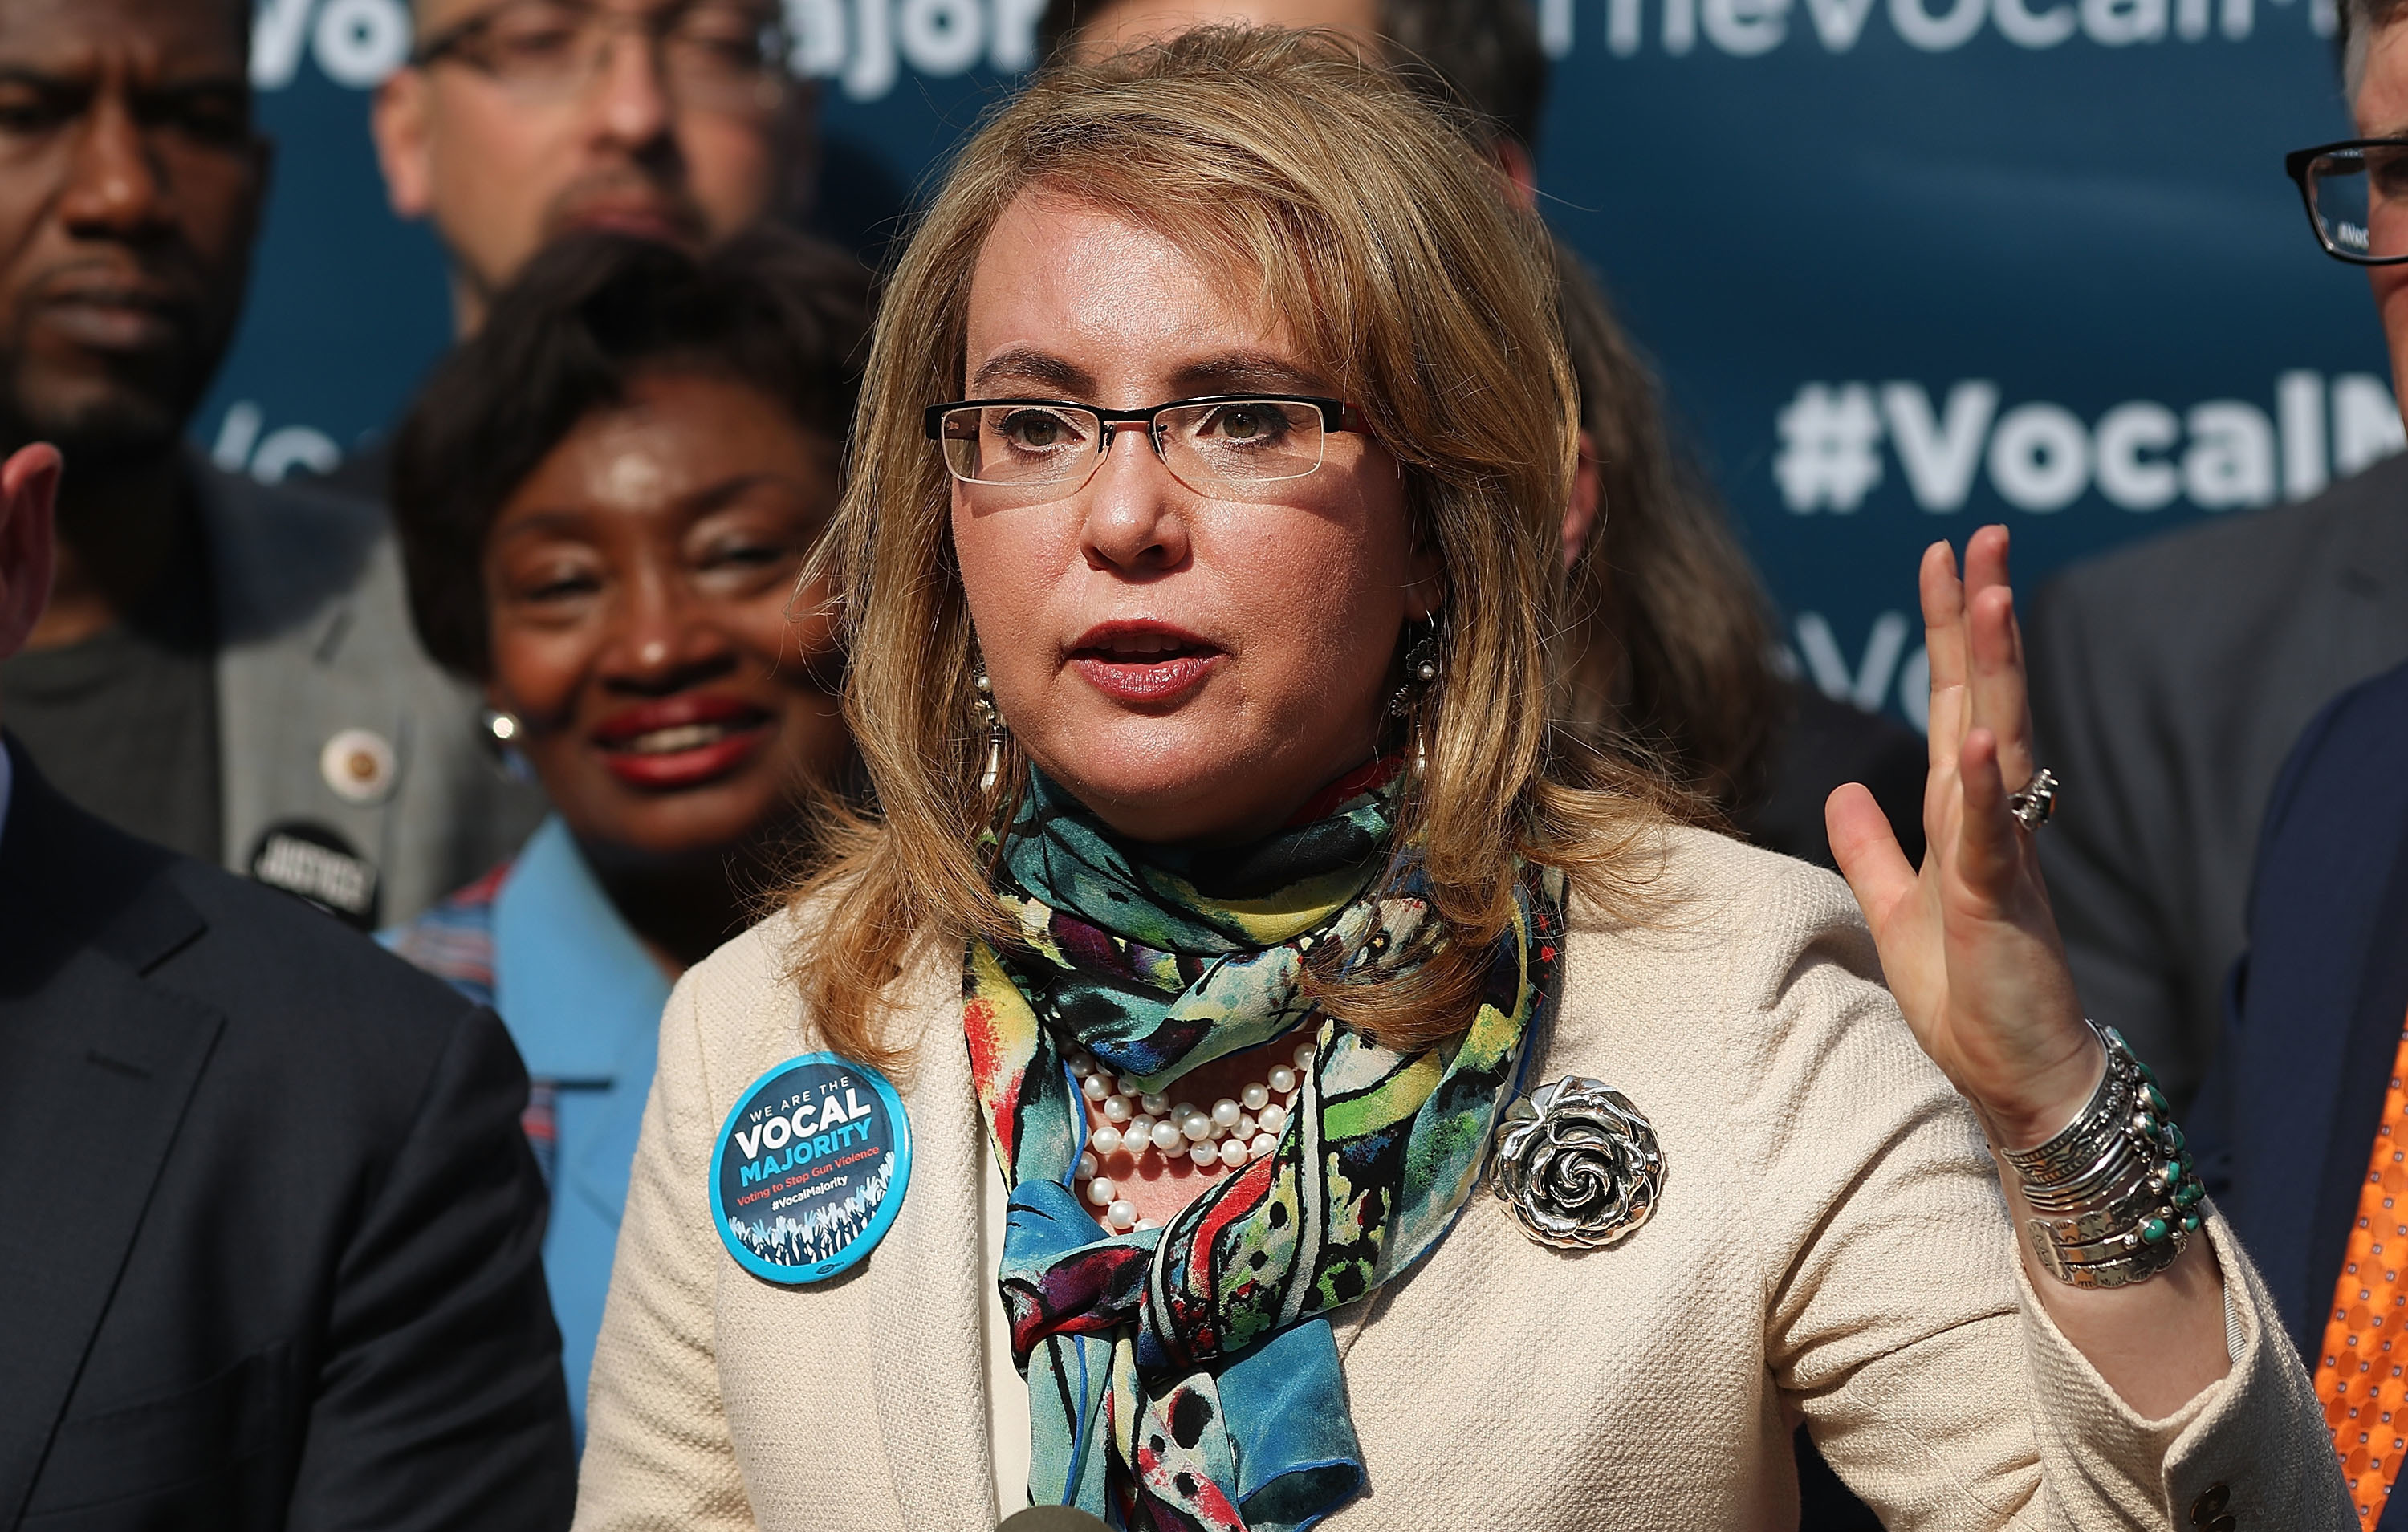 Former Rep. Gabrielle Giffords says lawmakers should "have some courage" and face their constituents at town halls, despite protests.
